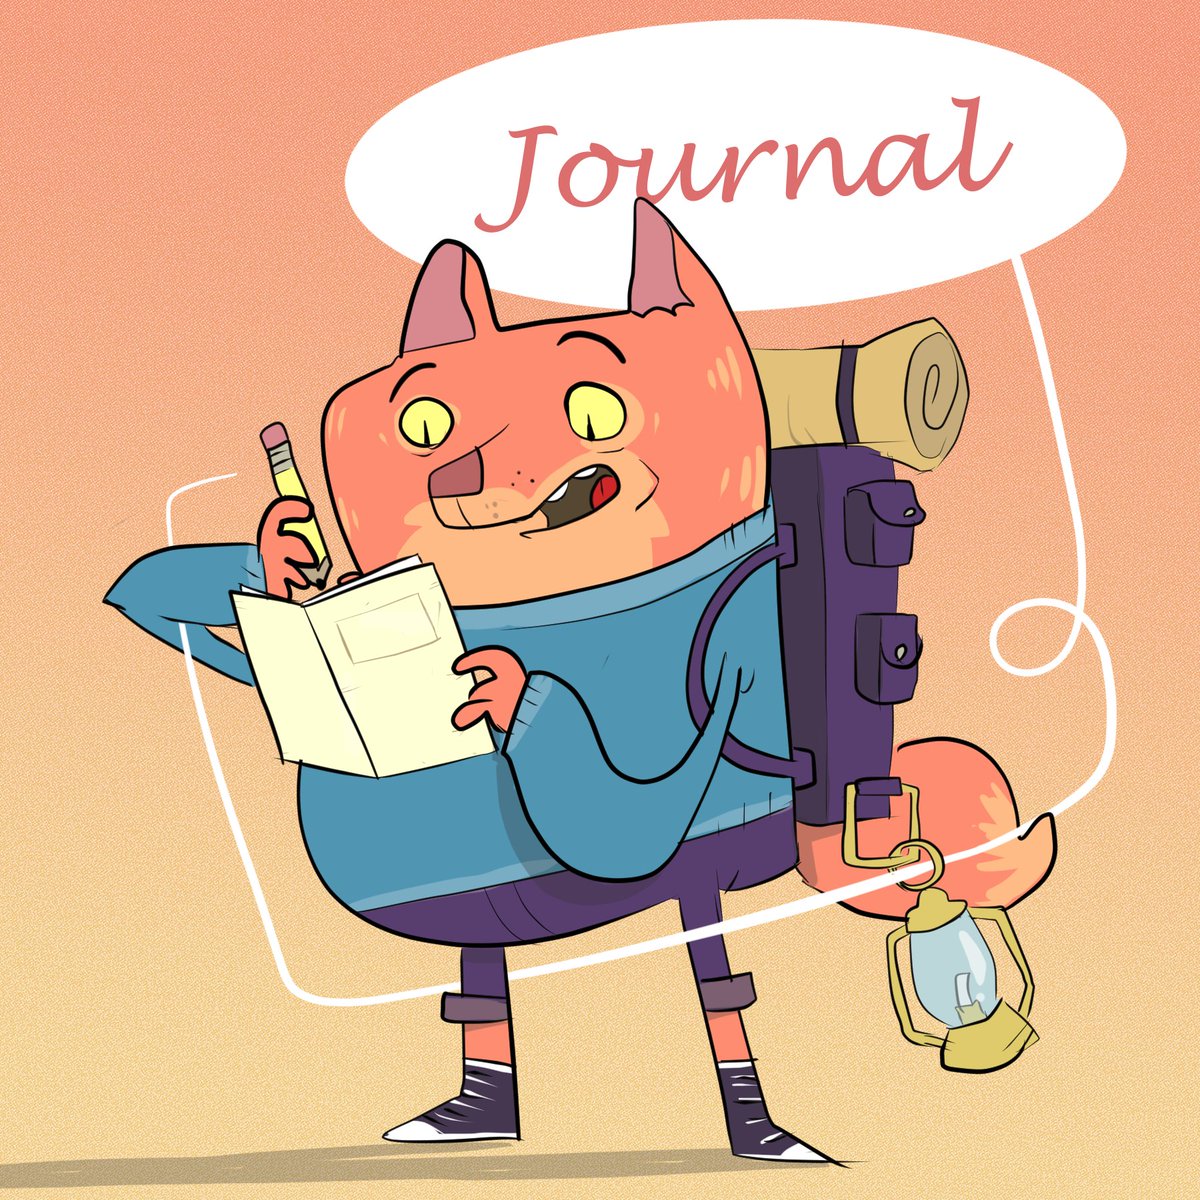 The word for this week’s #AnimalAlphabets is ‘Journal’. I decided to go with this kid and their field journal as they set out on adventure. @animalalphabets #characterdesign #journal #fieldjournal